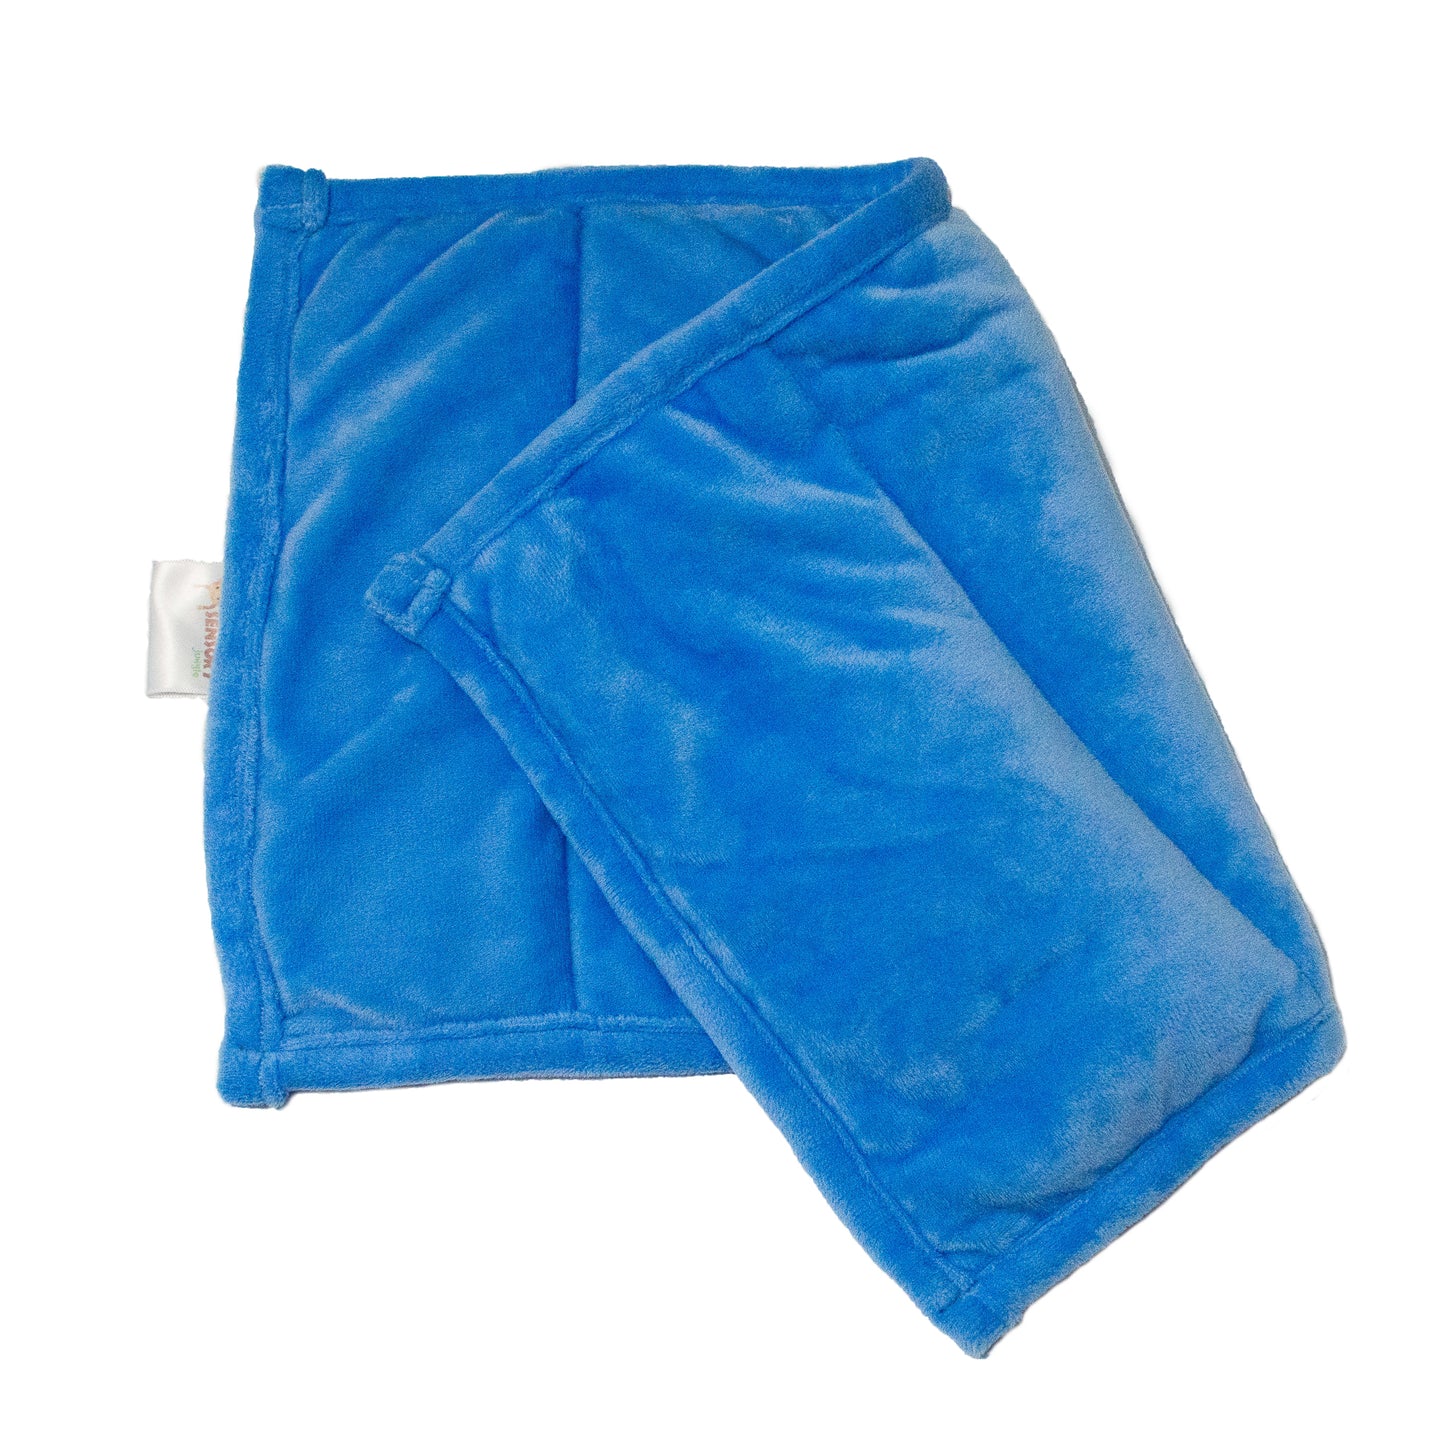 Weighted Lap Pad - Blue - 3 Pound